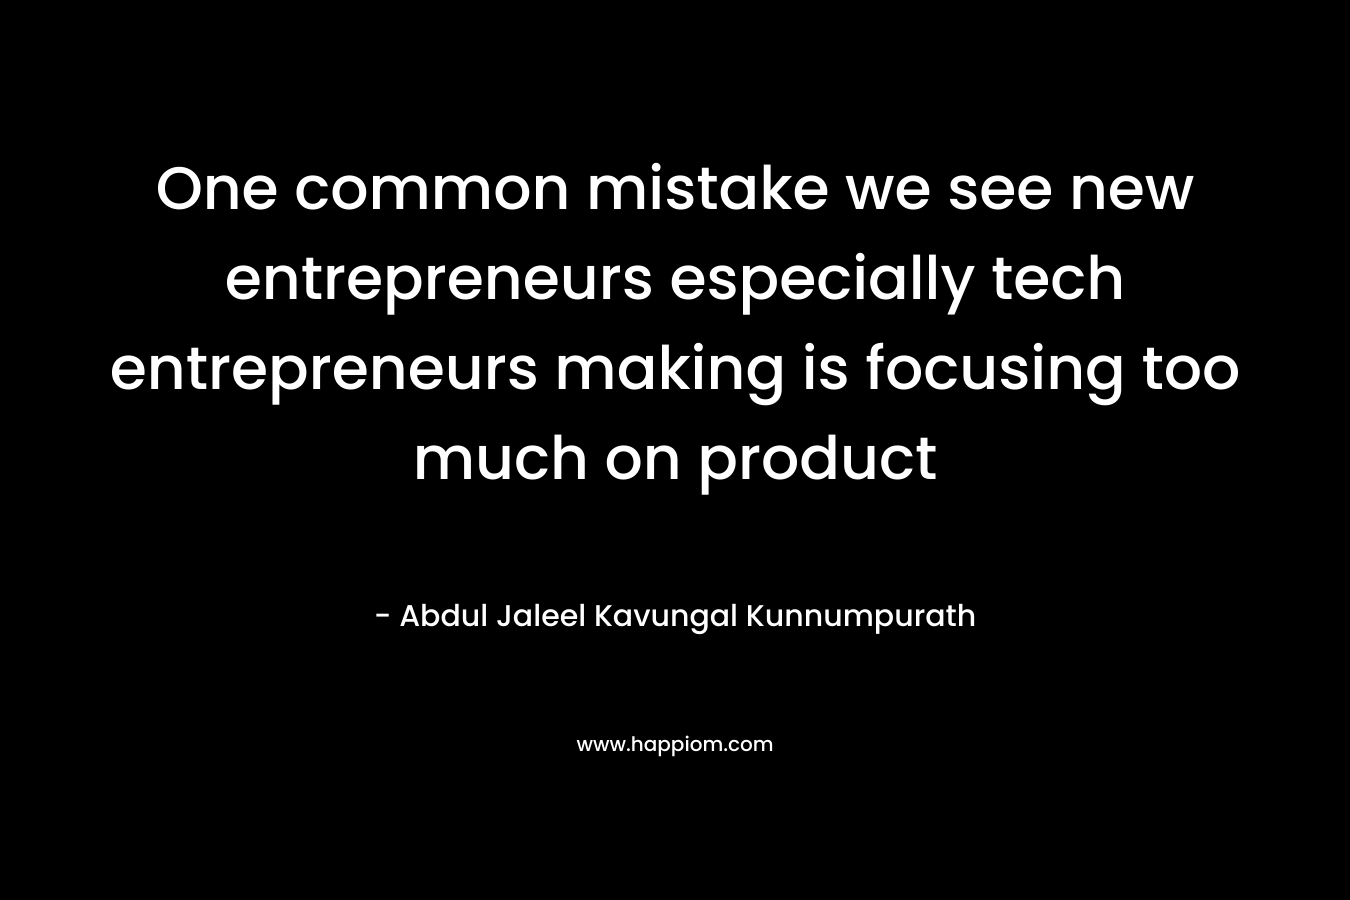 One common mistake we see new entrepreneurs especially tech entrepreneurs making is focusing too much on product – Abdul Jaleel Kavungal Kunnumpurath